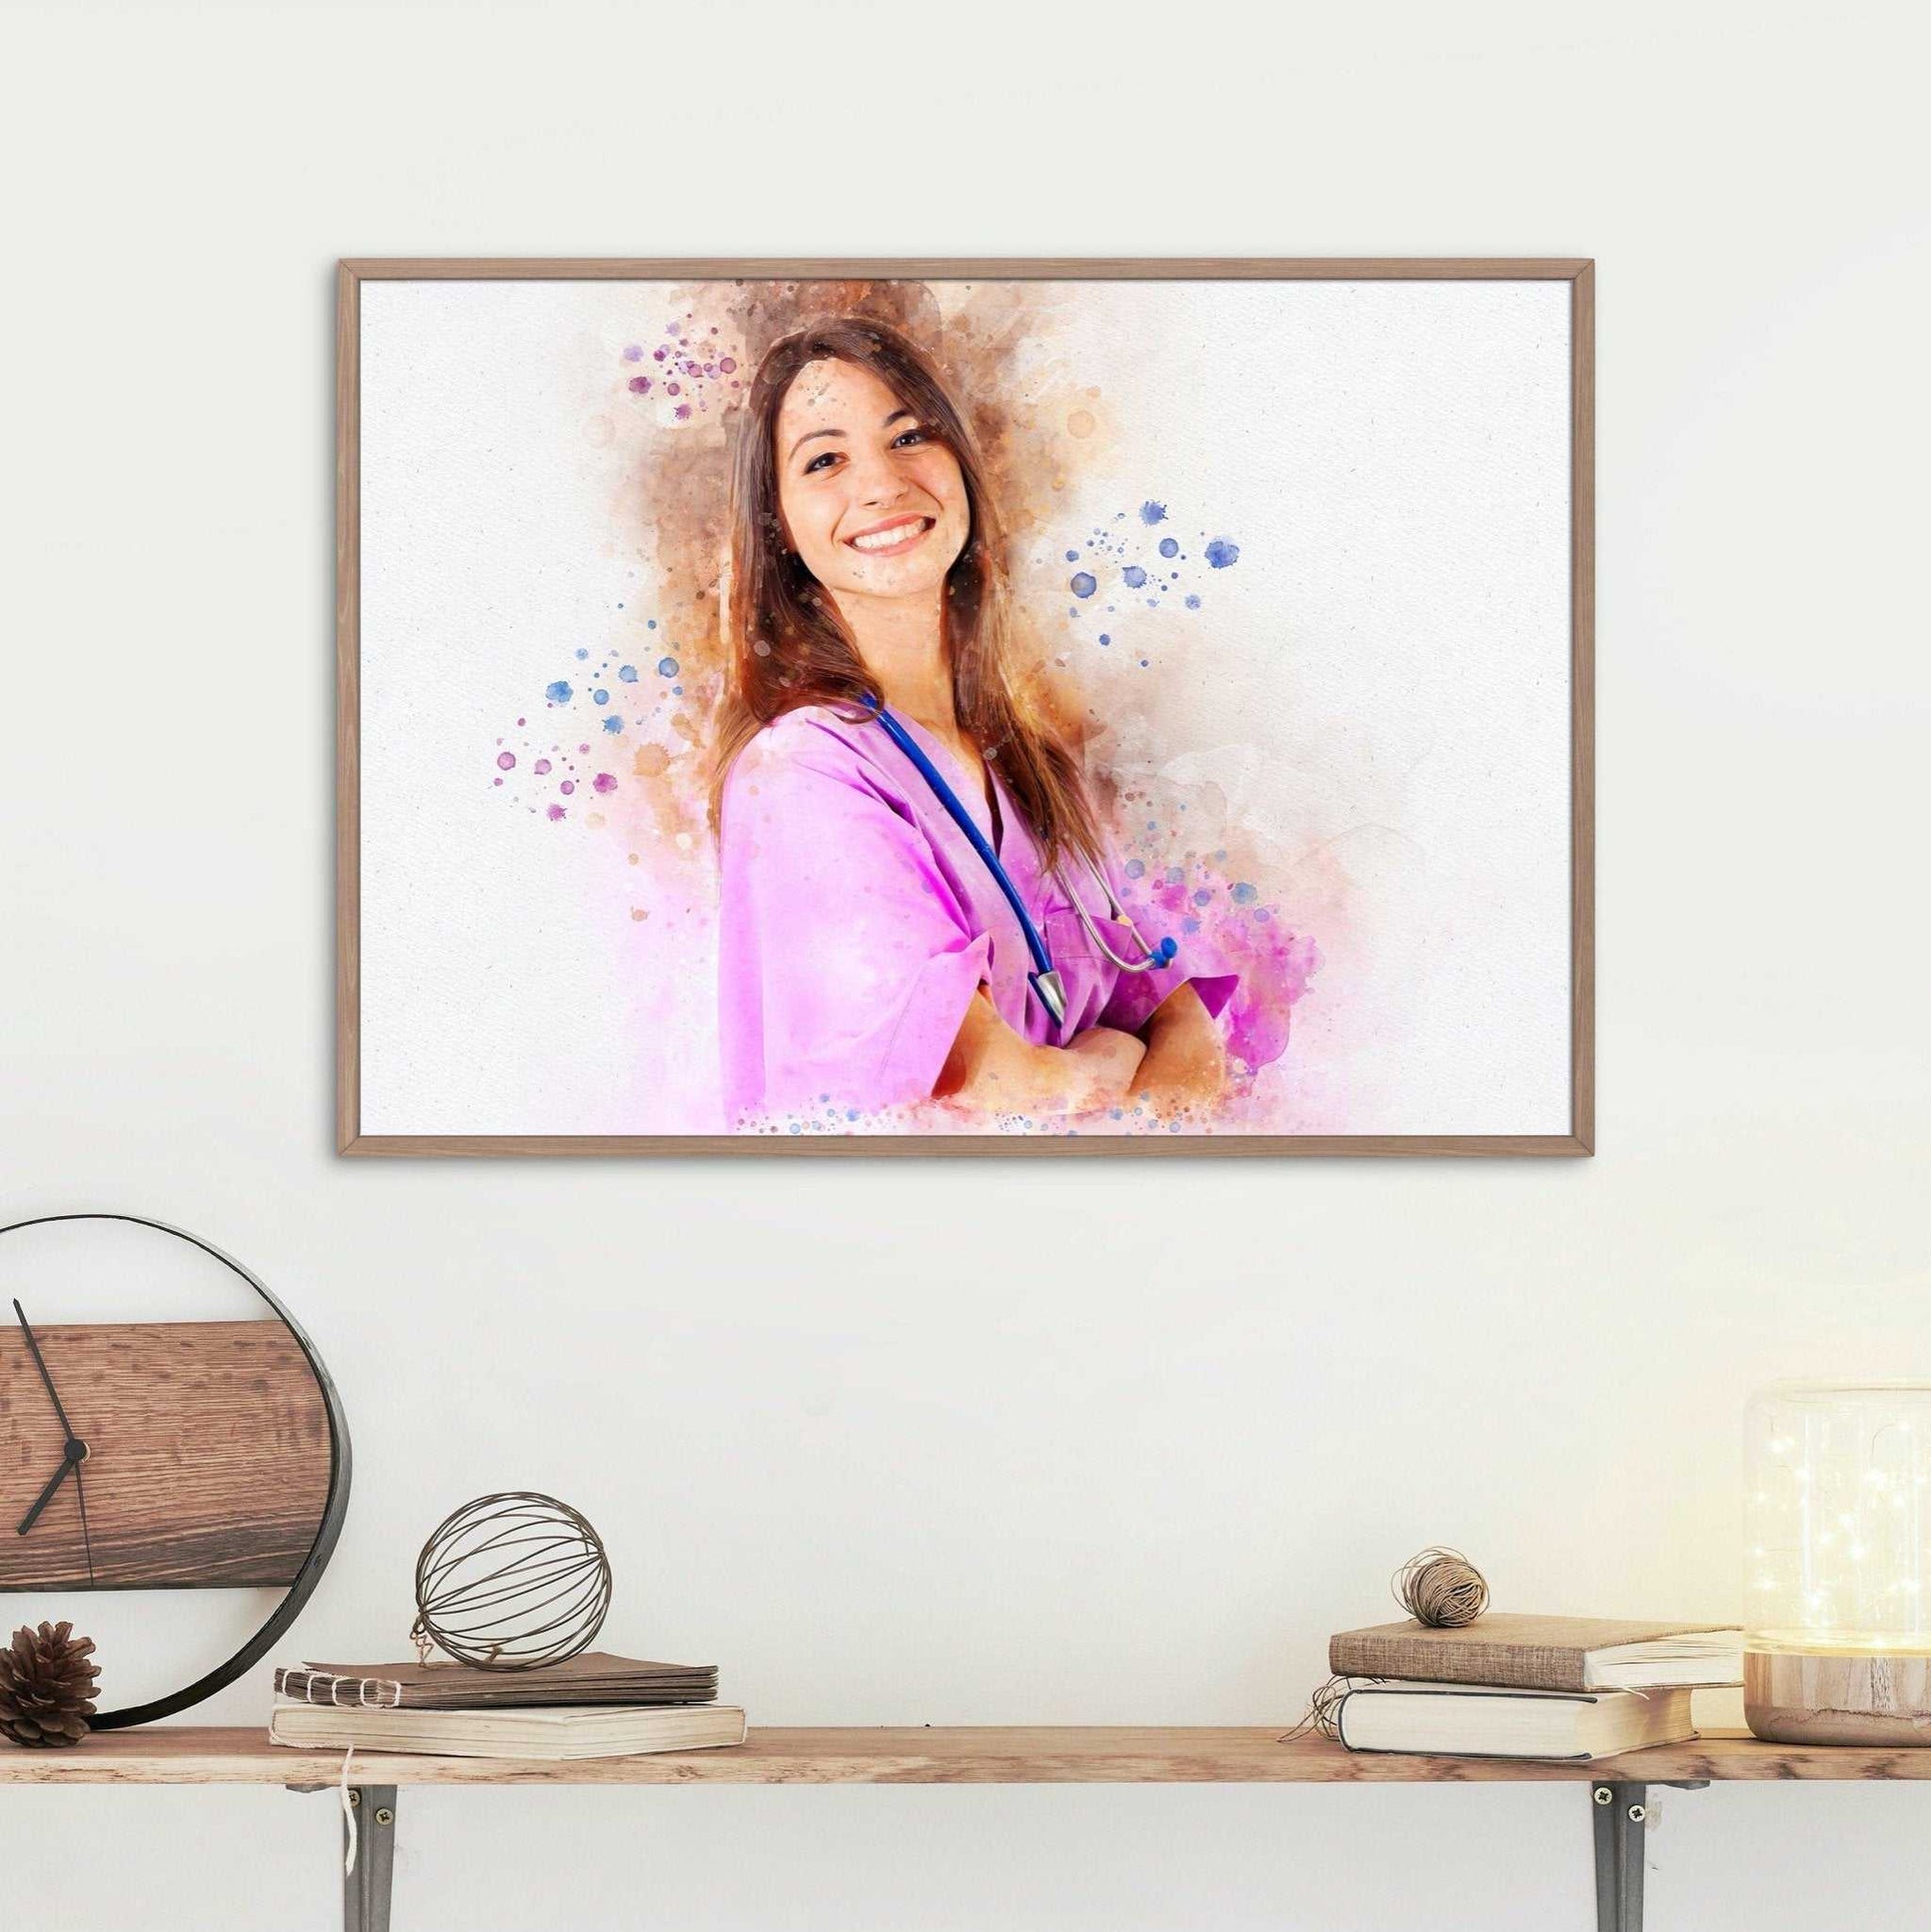 Nursing Graduation Gifts | Custom Painting on Canvas | Photo to Painting - FromPicToArt